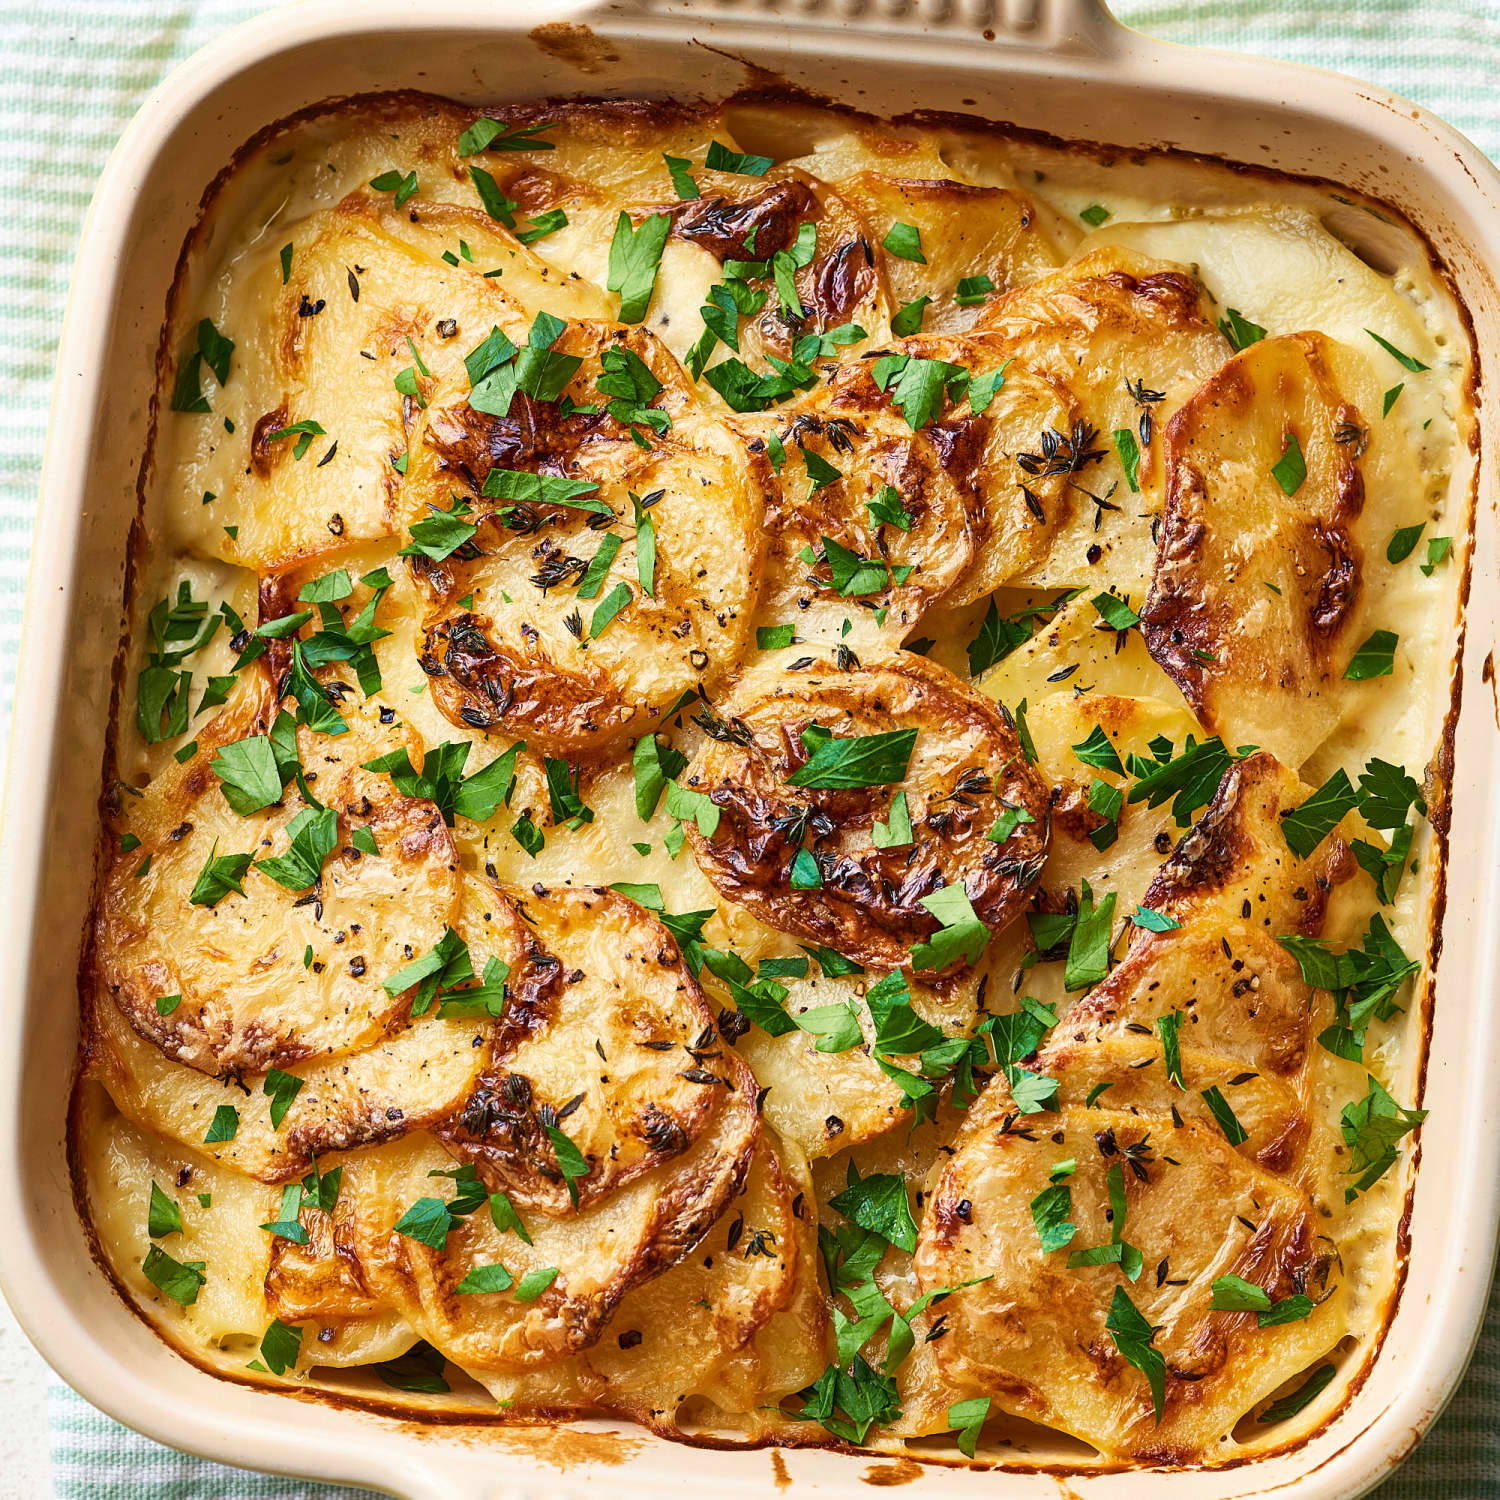 Better Box Scalloped Potatoes A Complete Guide On How To Upgrade Your